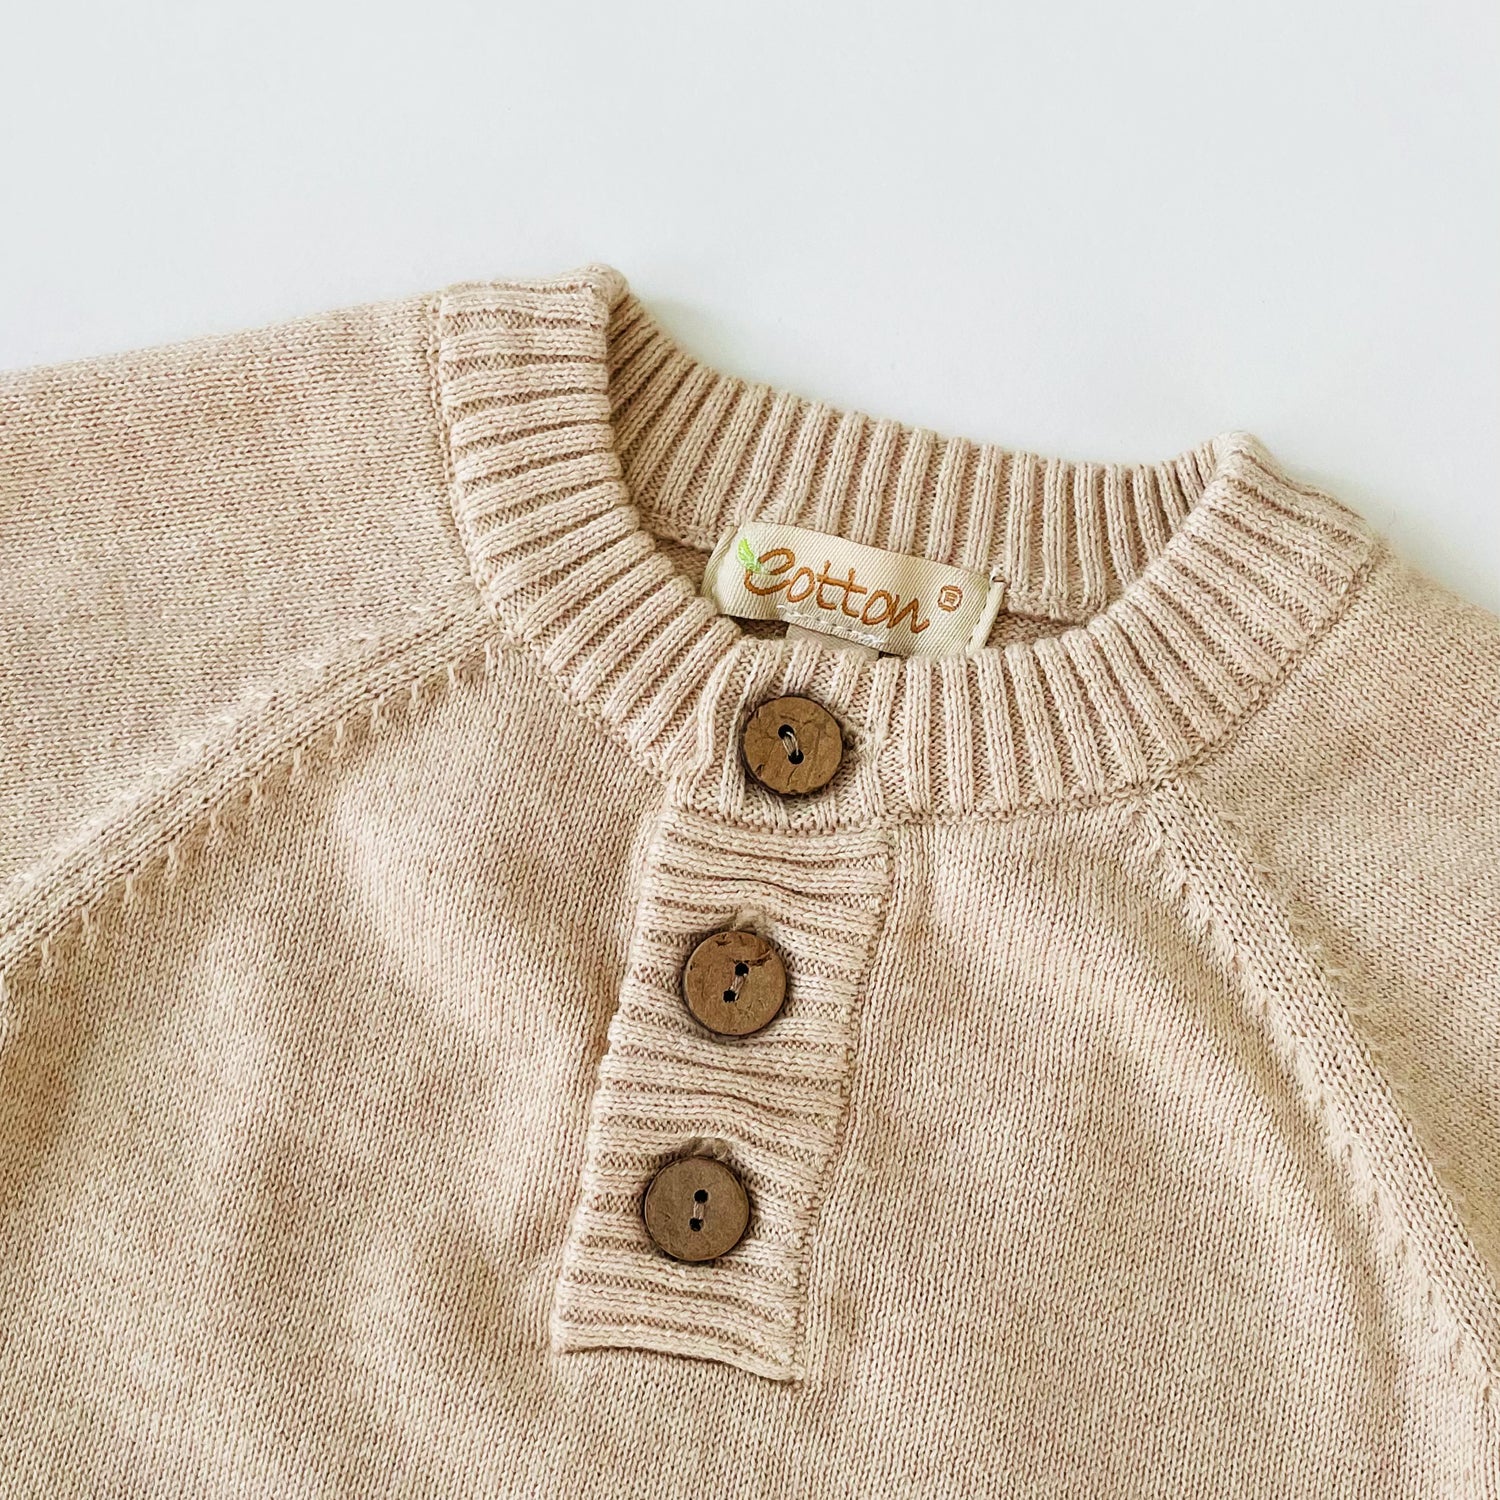 Knitted Newborn Clothes | Organic Knitted Sweater Baby Bodysuit - EottonCanada